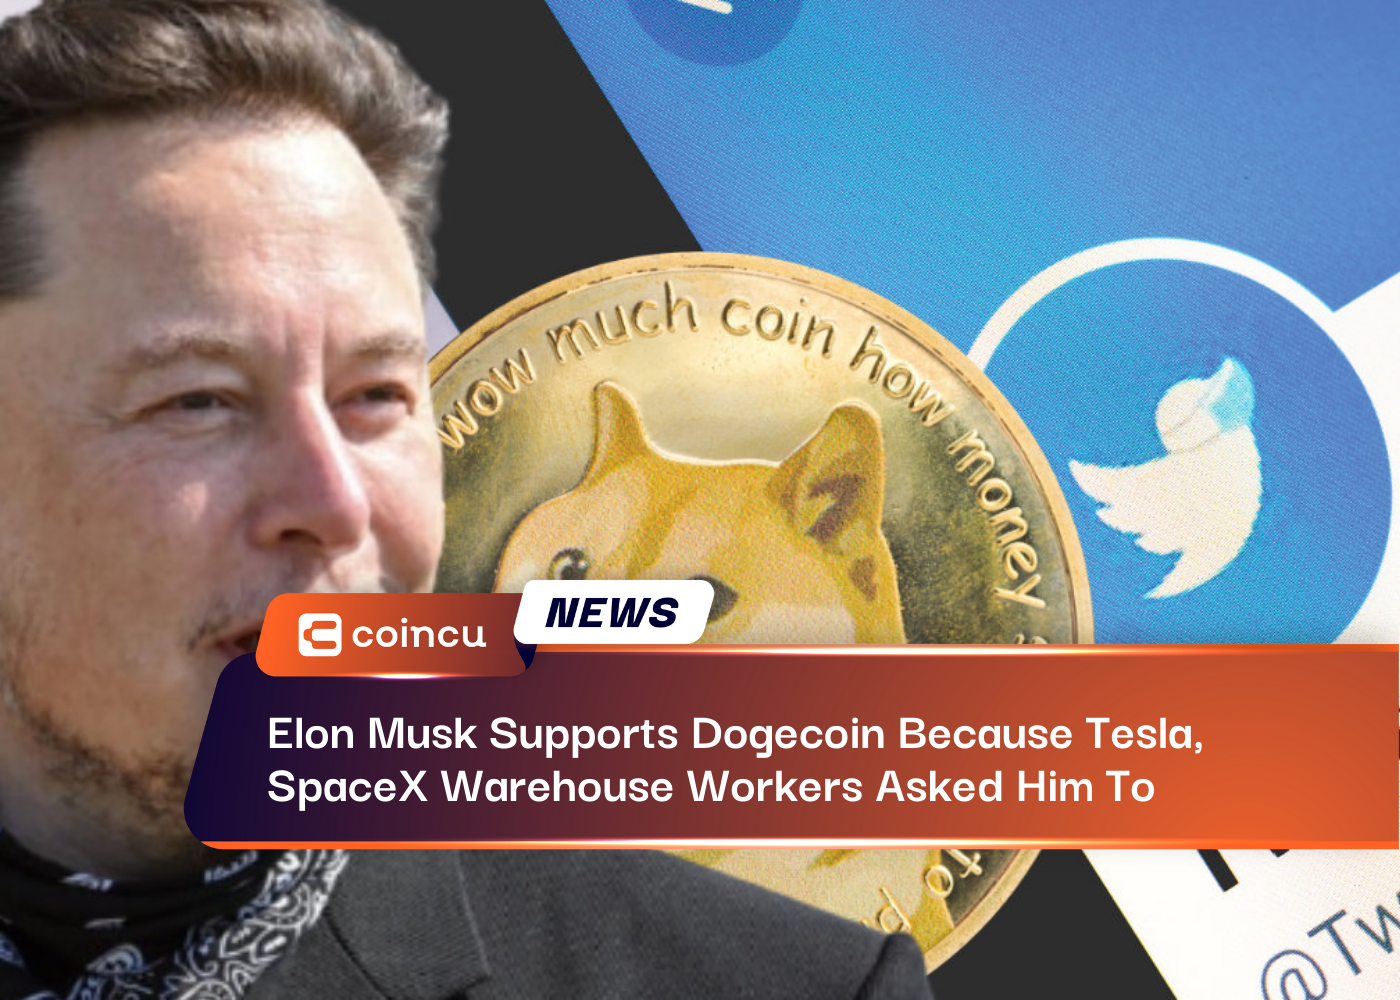 Elon Musk Supports Dogecoin Because Tesla, SpaceX Warehouse Workers Asked Him To